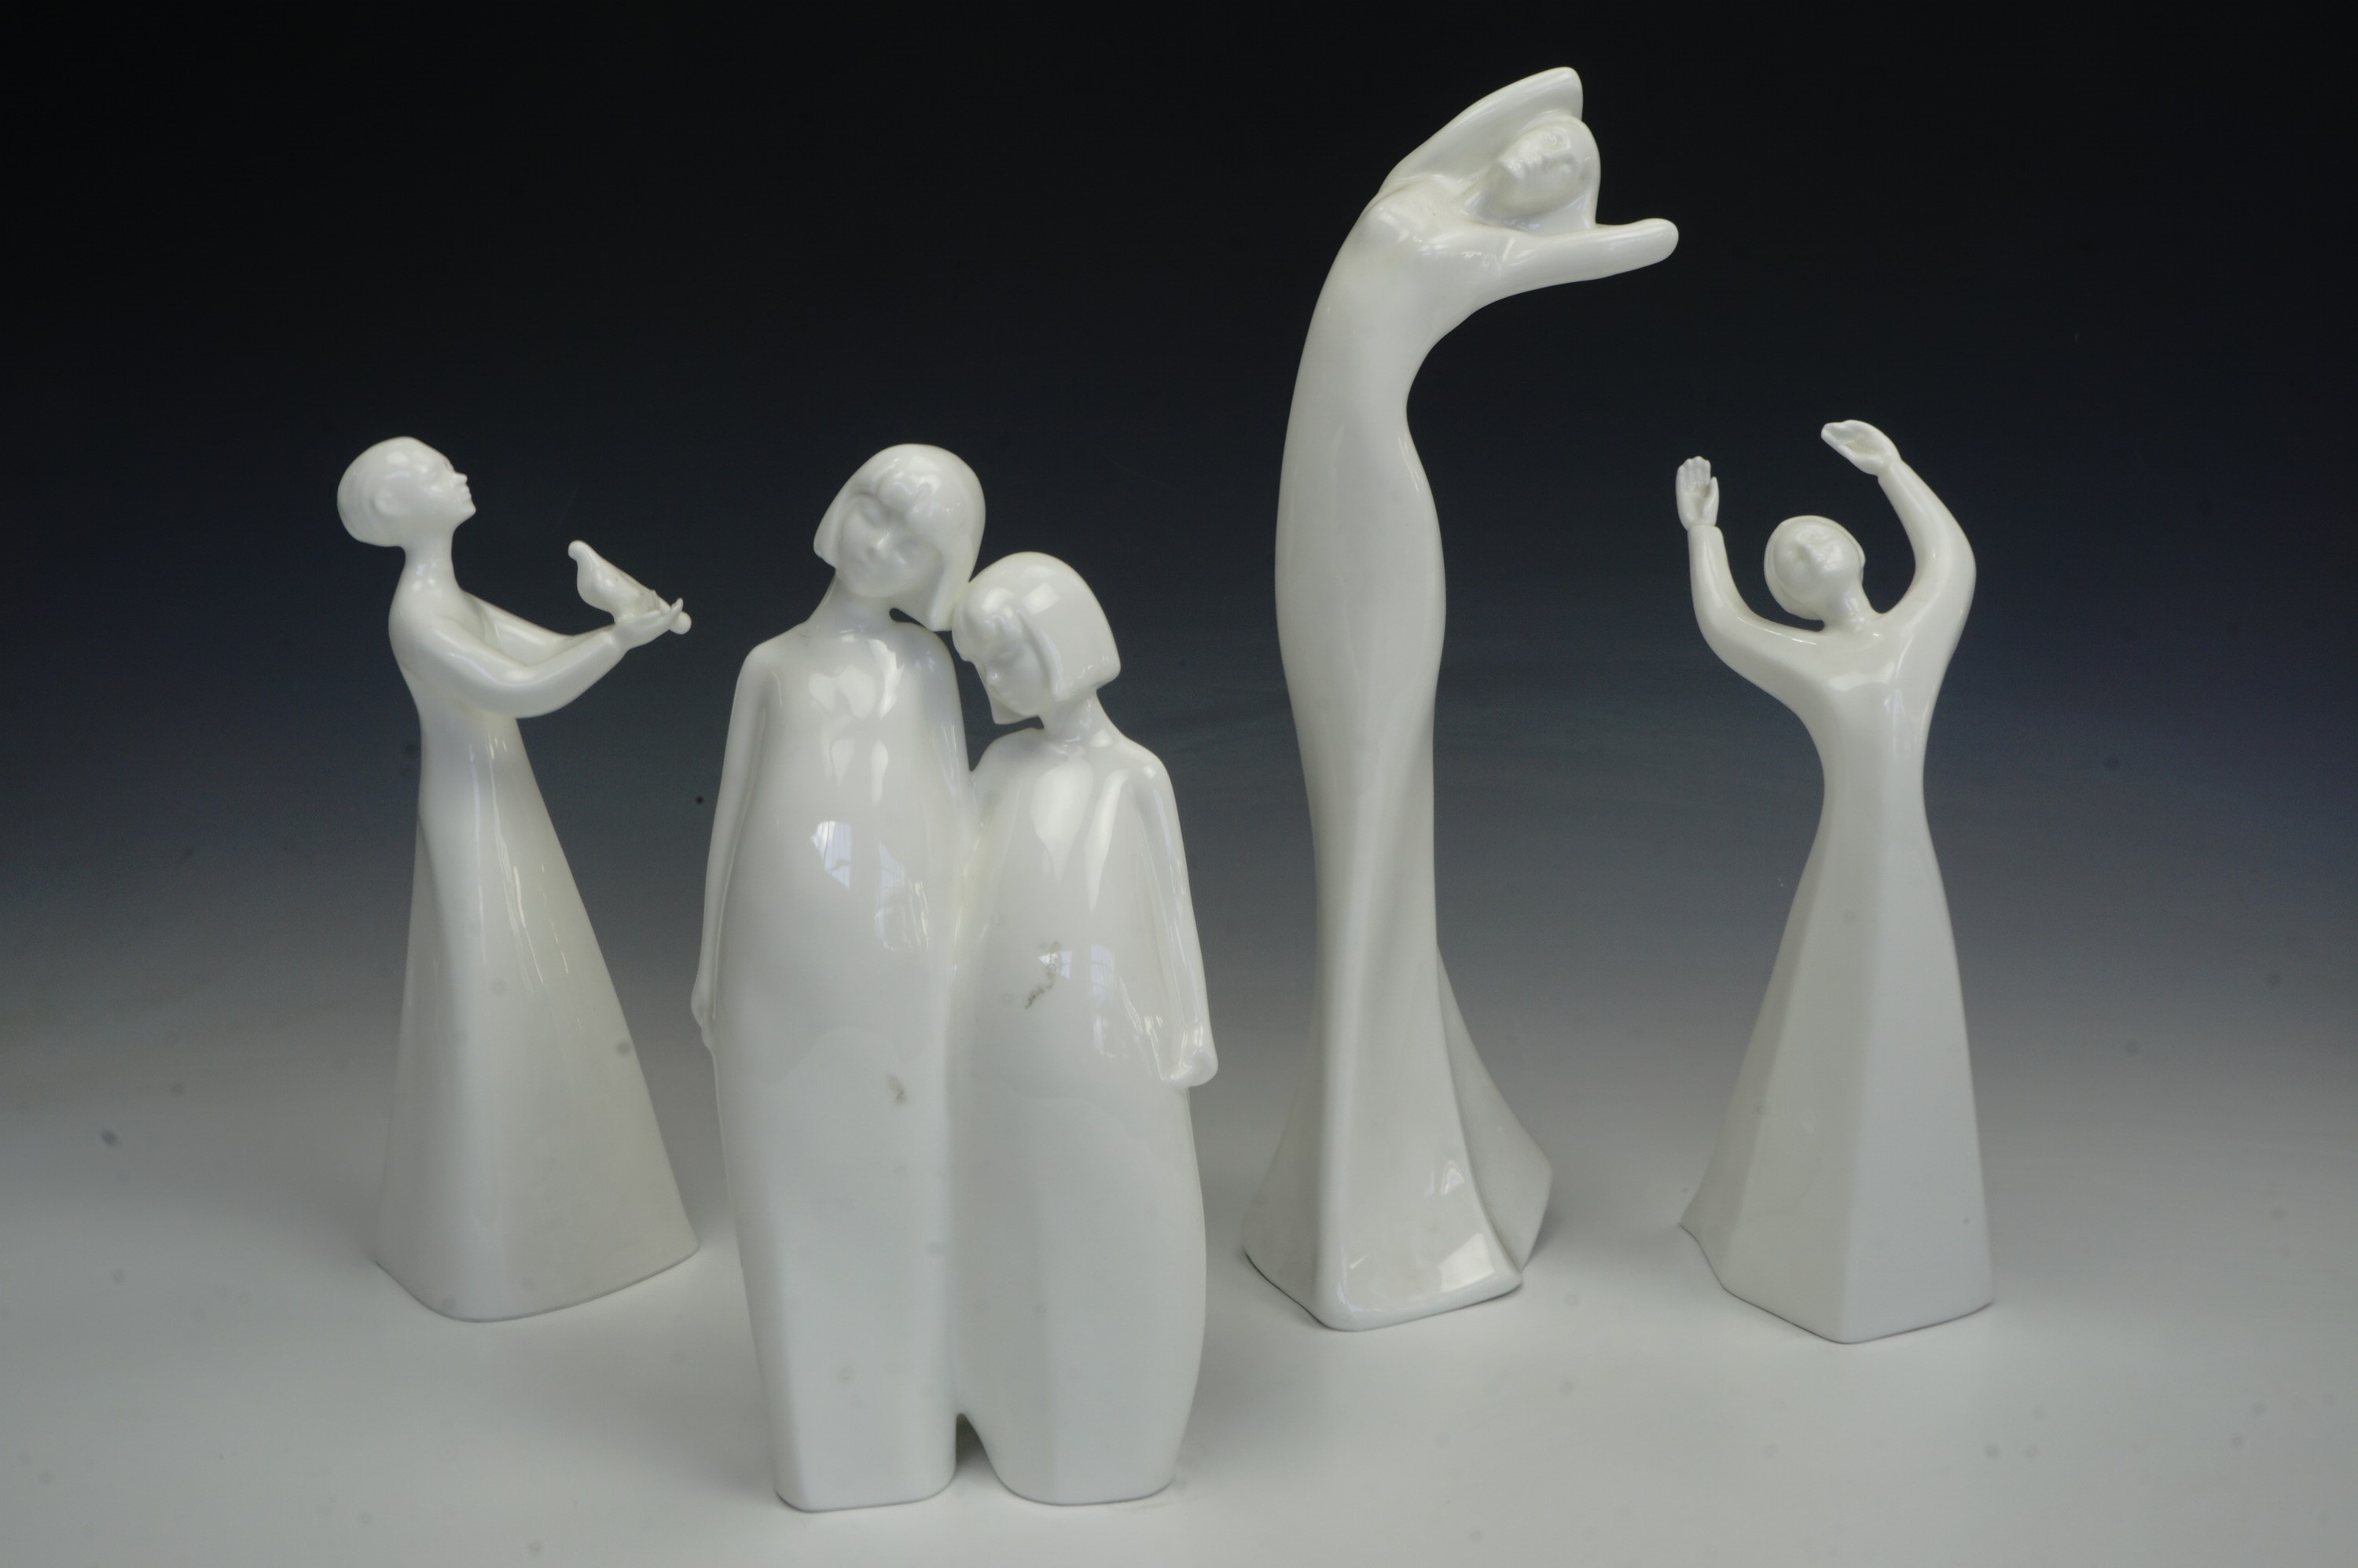 Four Royal Doulton figurines; 'Yearning', 'Sisters', 'Awakening' and 'Peace', tallest 29 cm